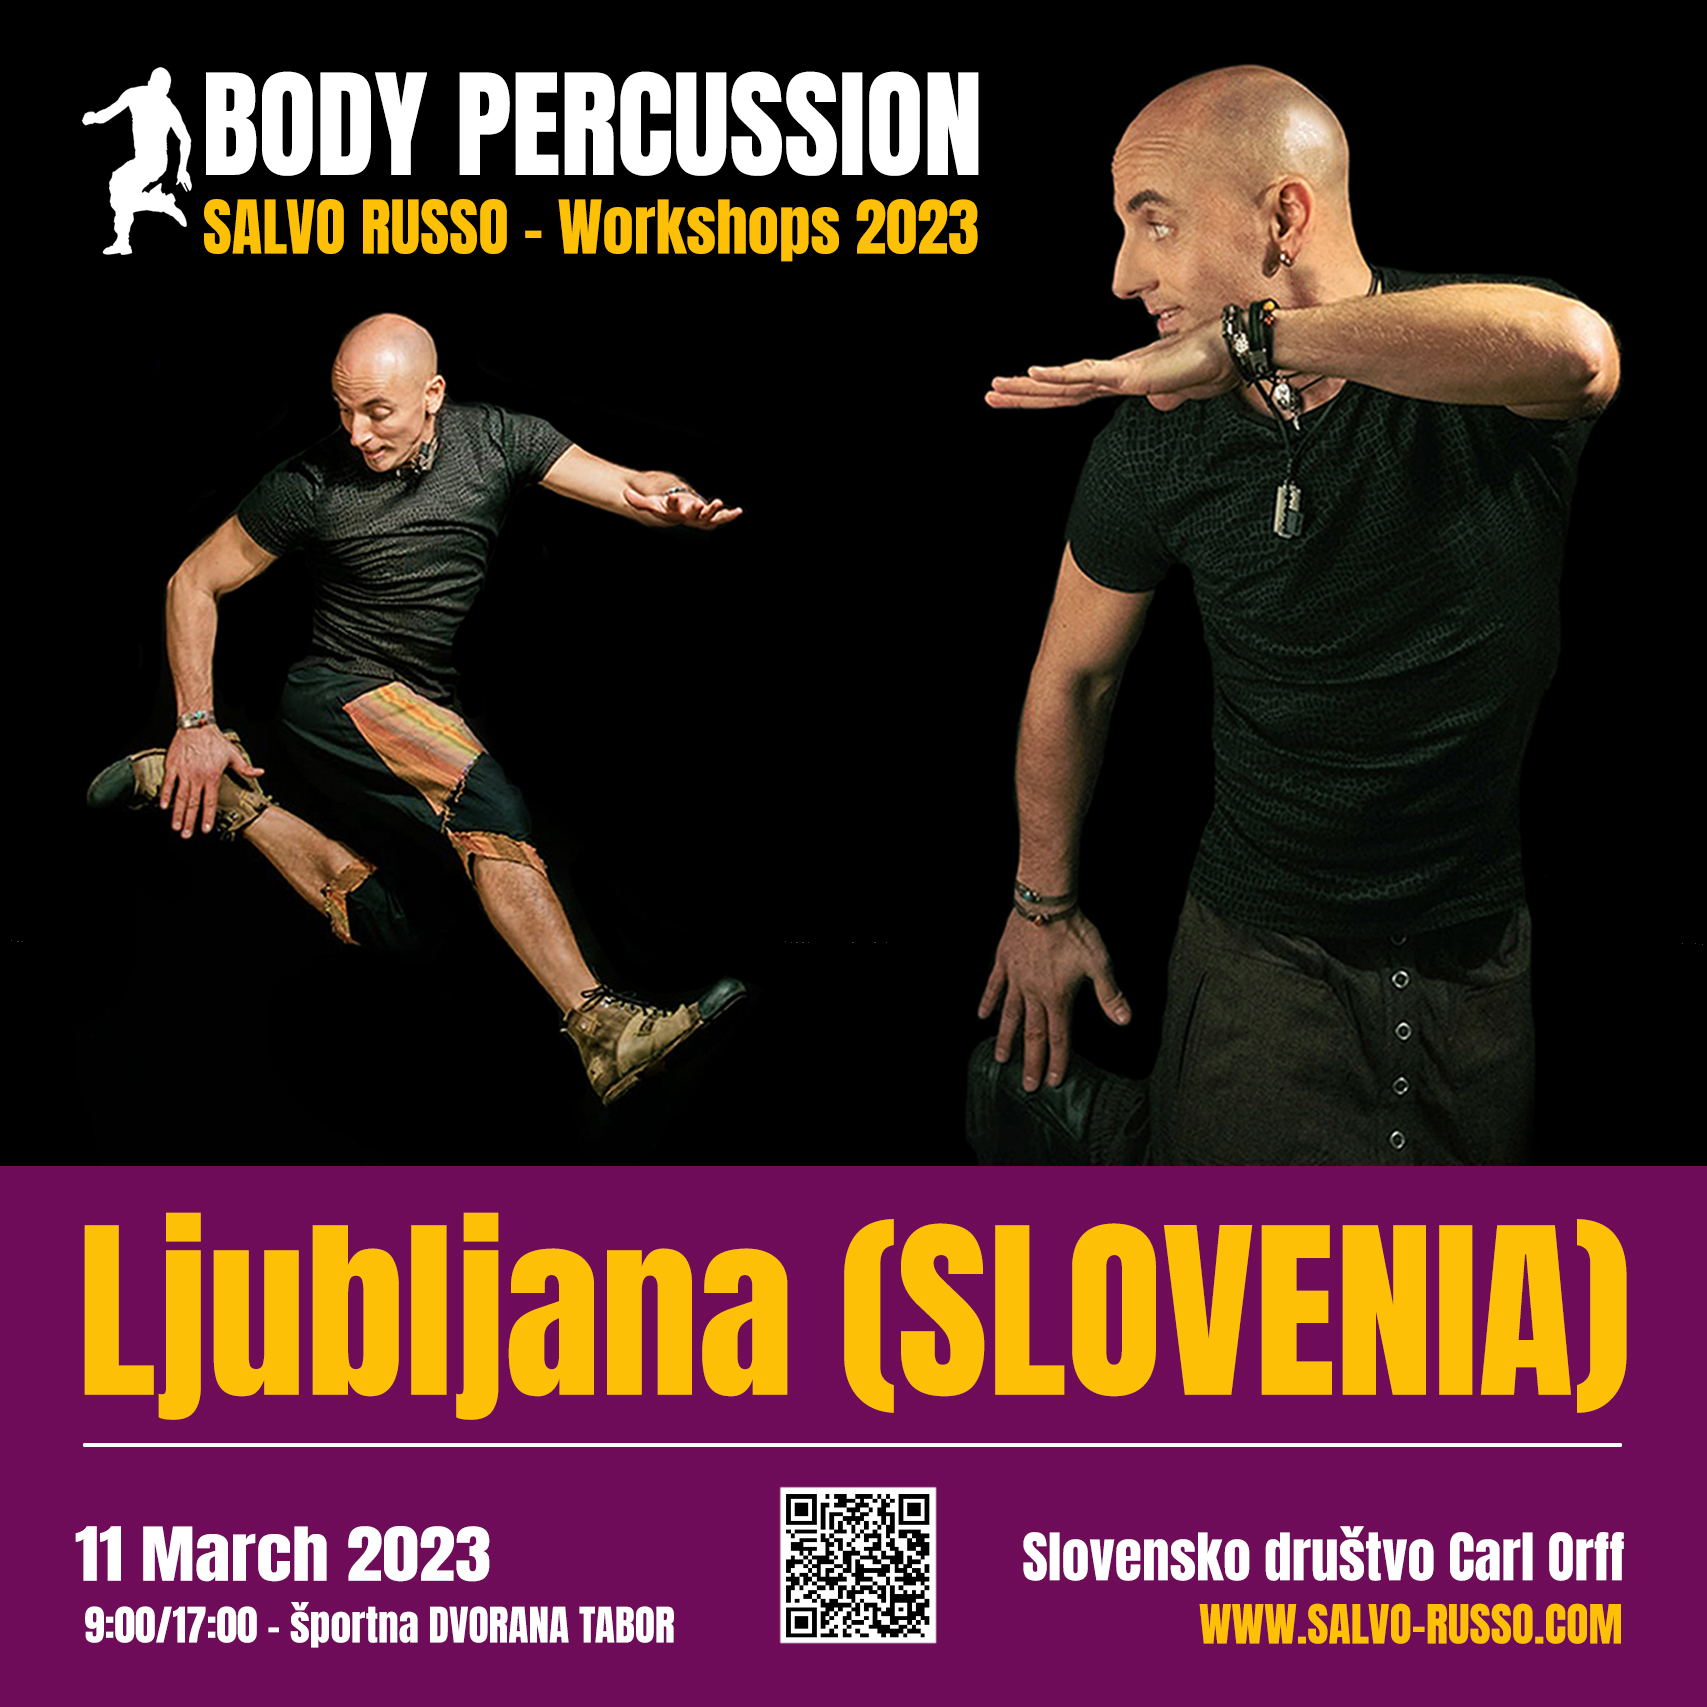 Body Percussion Workshop Salvo Russo